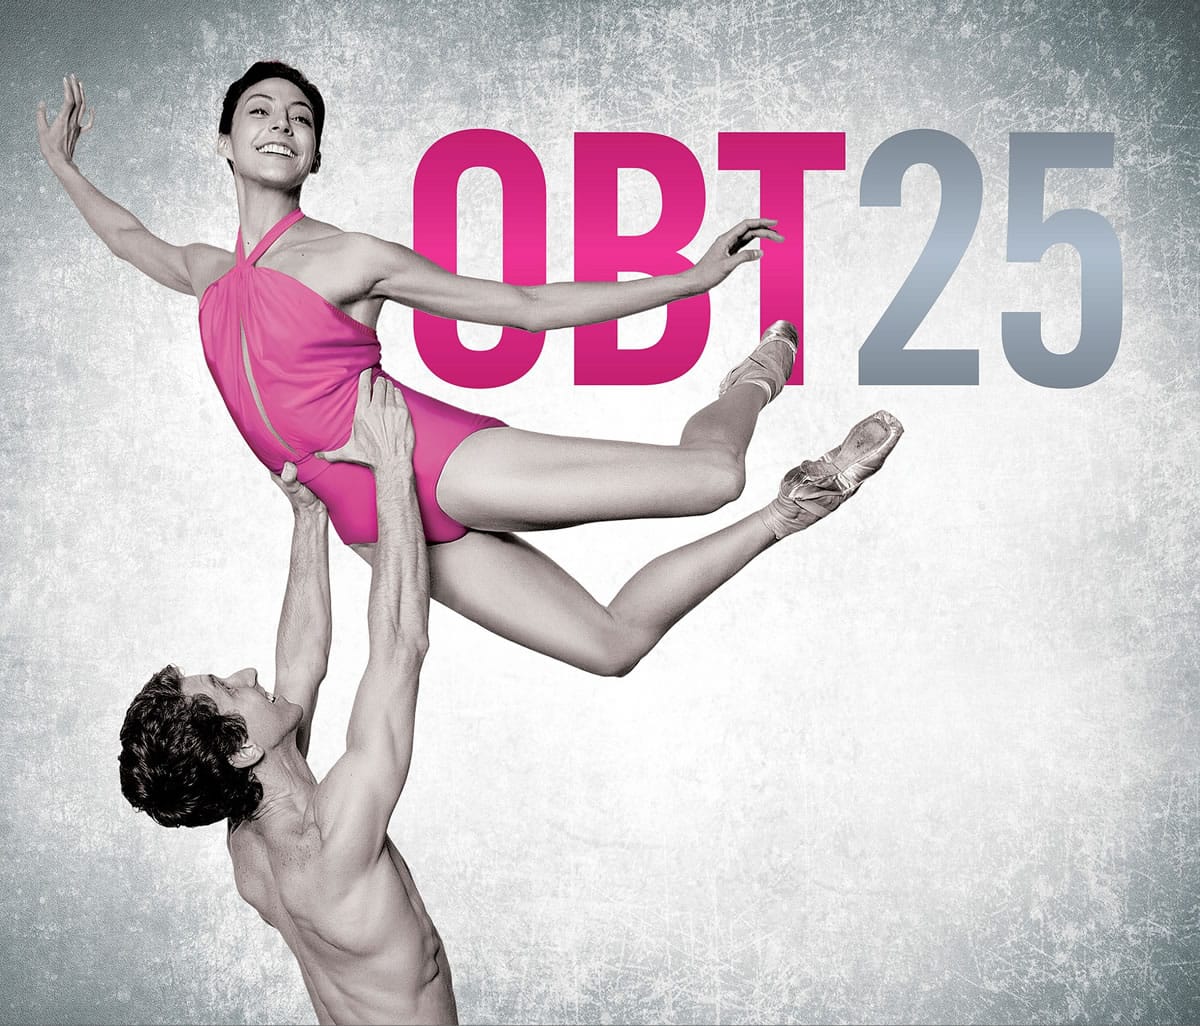 Oregon Ballet Theatre opens its 25th anniversary season with &quot;OBT 25,&quot; Oct. 11-18, 2014 at the Keller Auditorium in Portland.